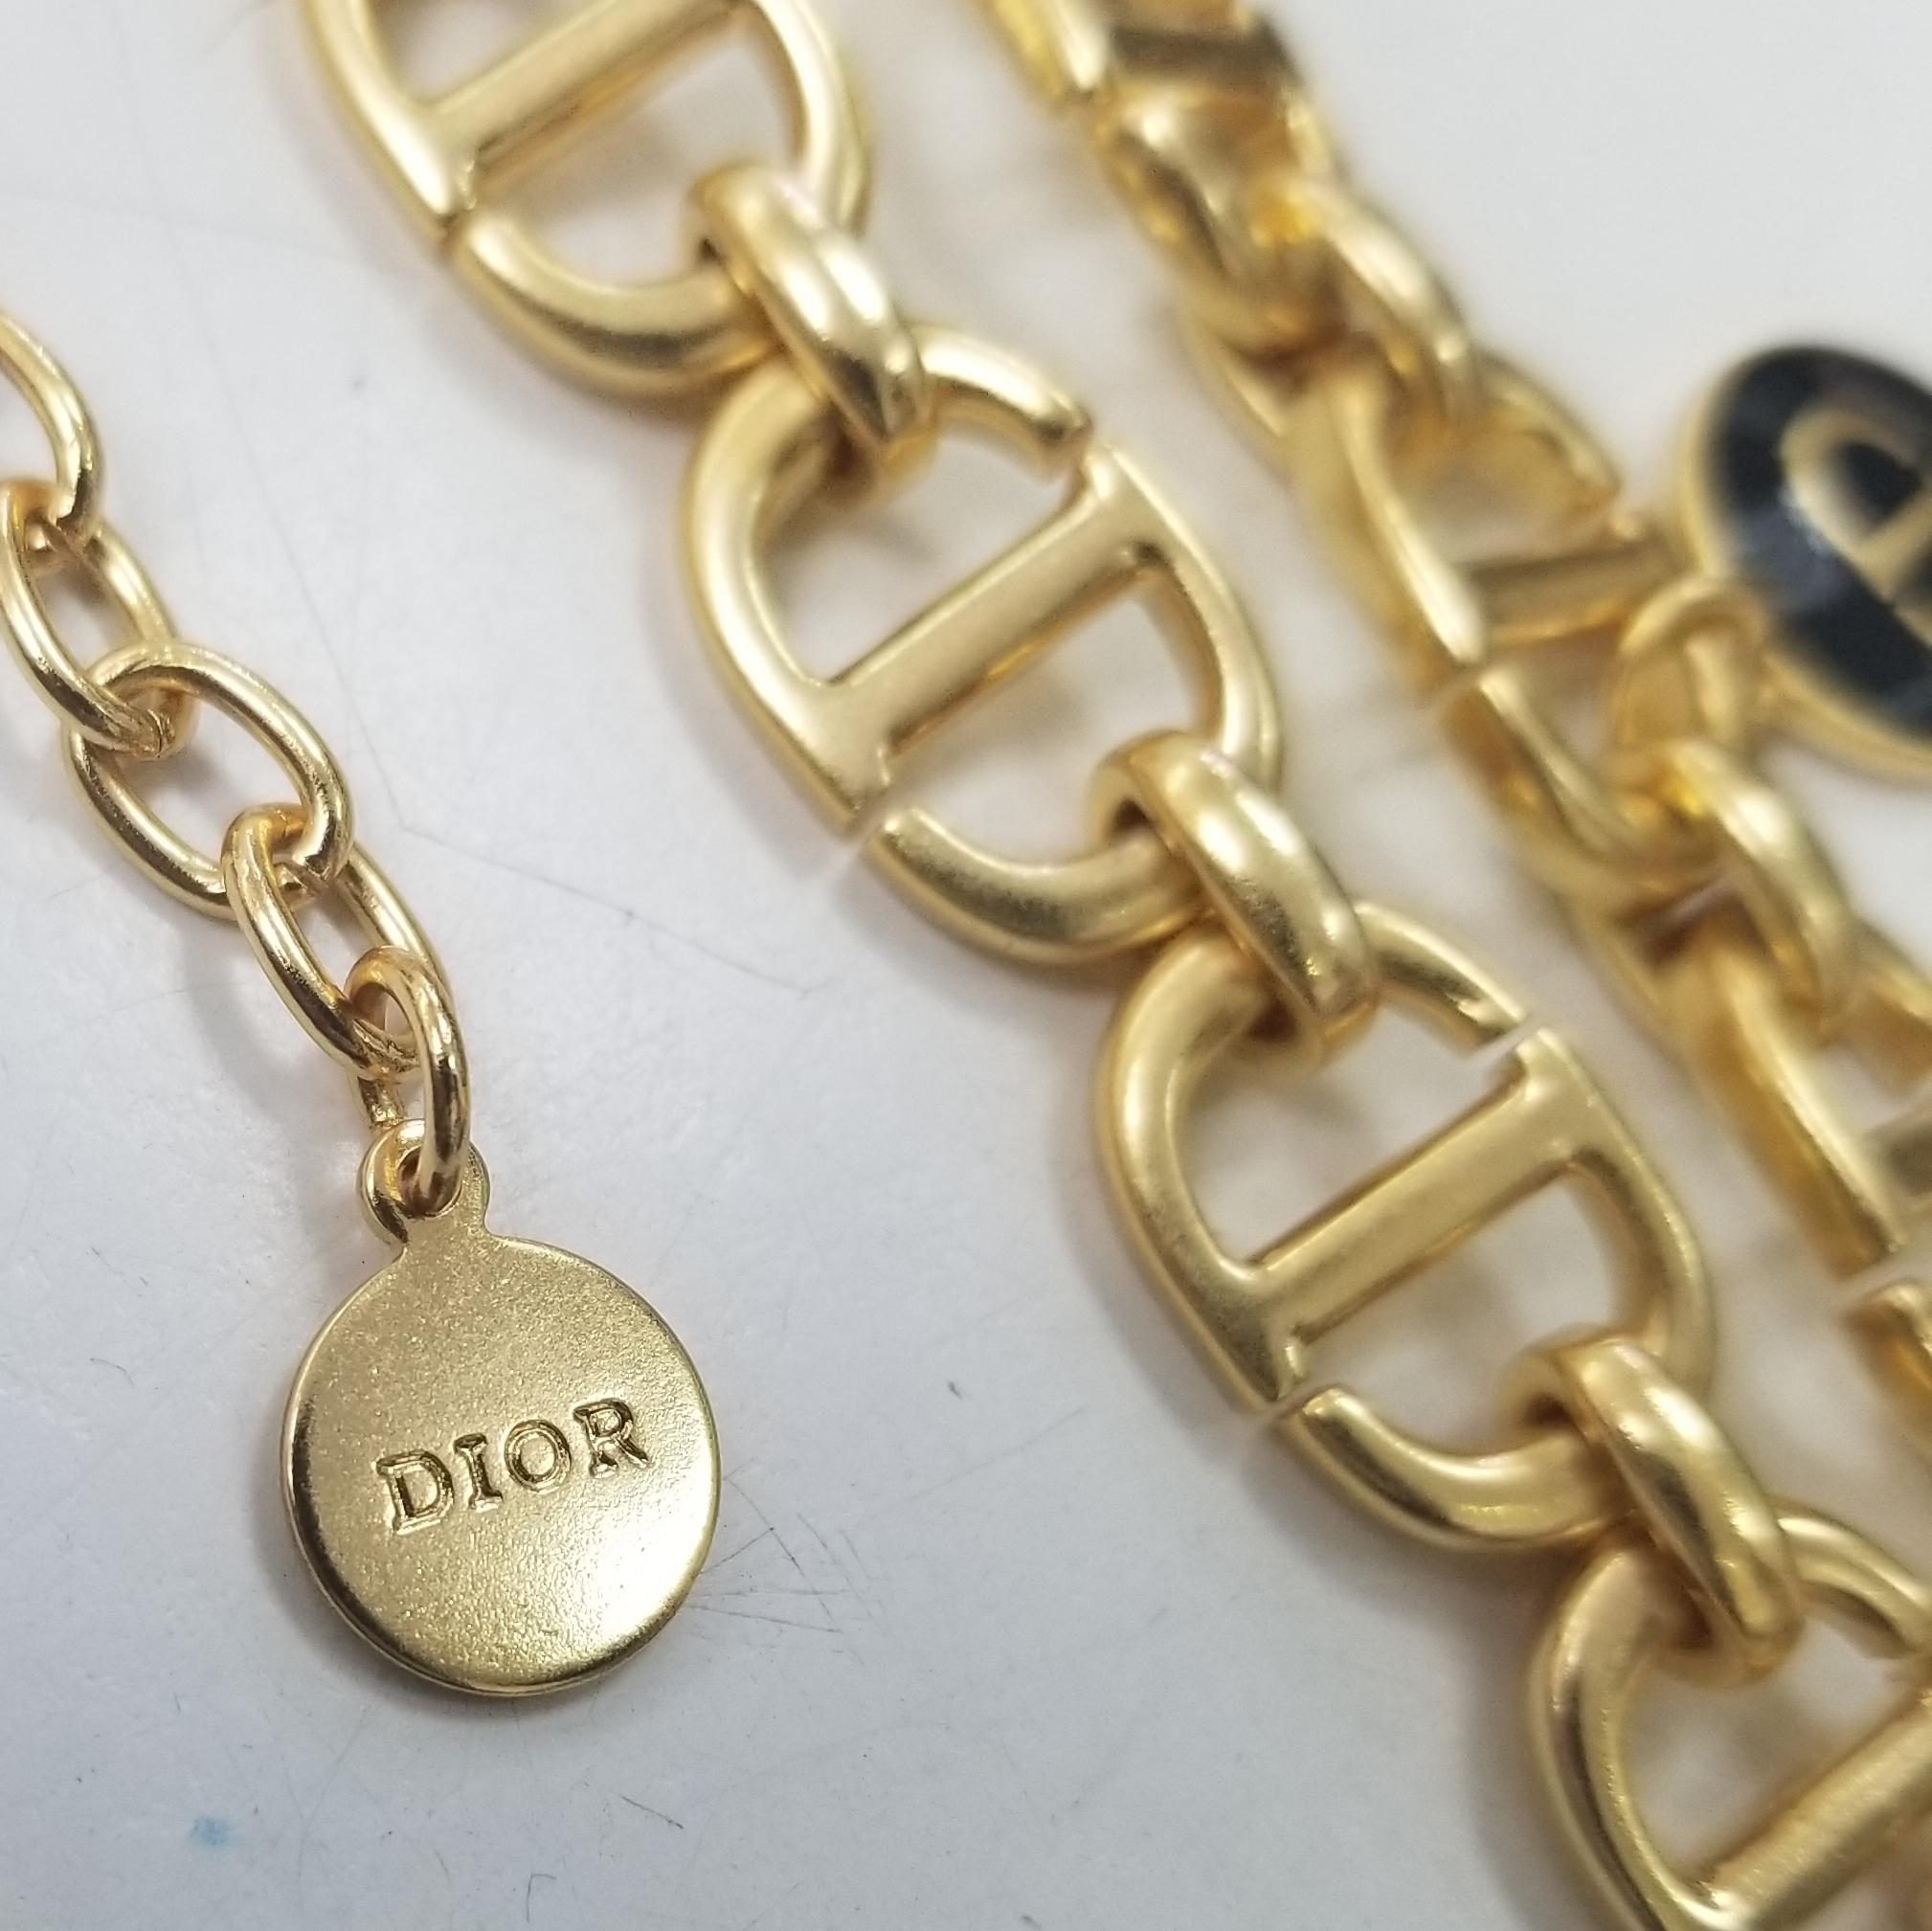 Modern Christian Dior CD Necklace, Bracelet and Earring in Gold with Adjustable Chain